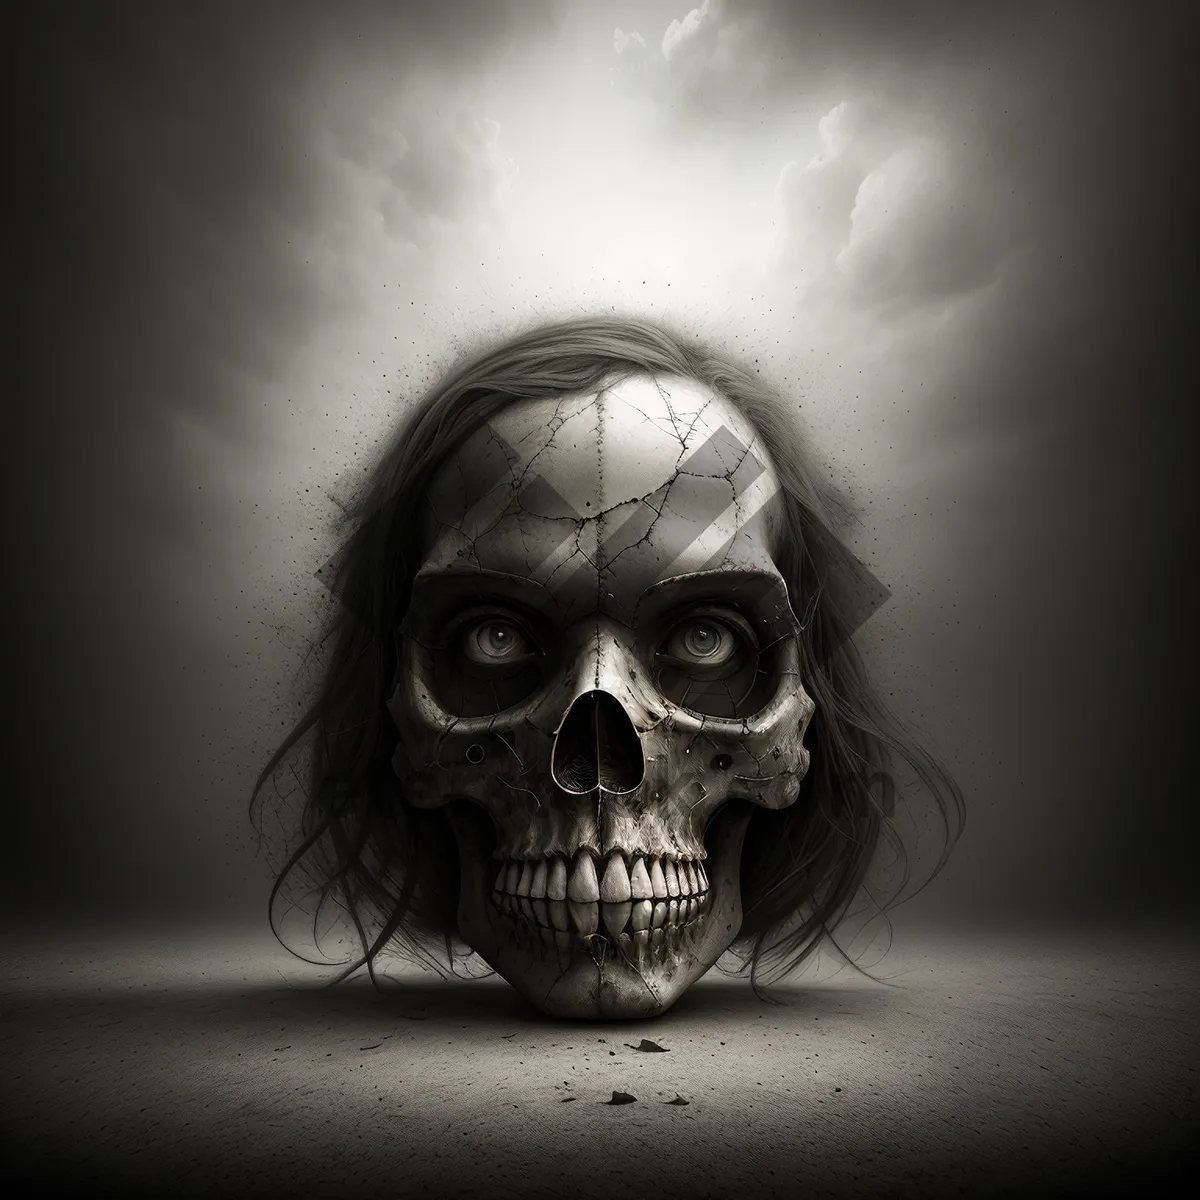 Picture of Grim Reaper's masked skull portrait - Death's disguise